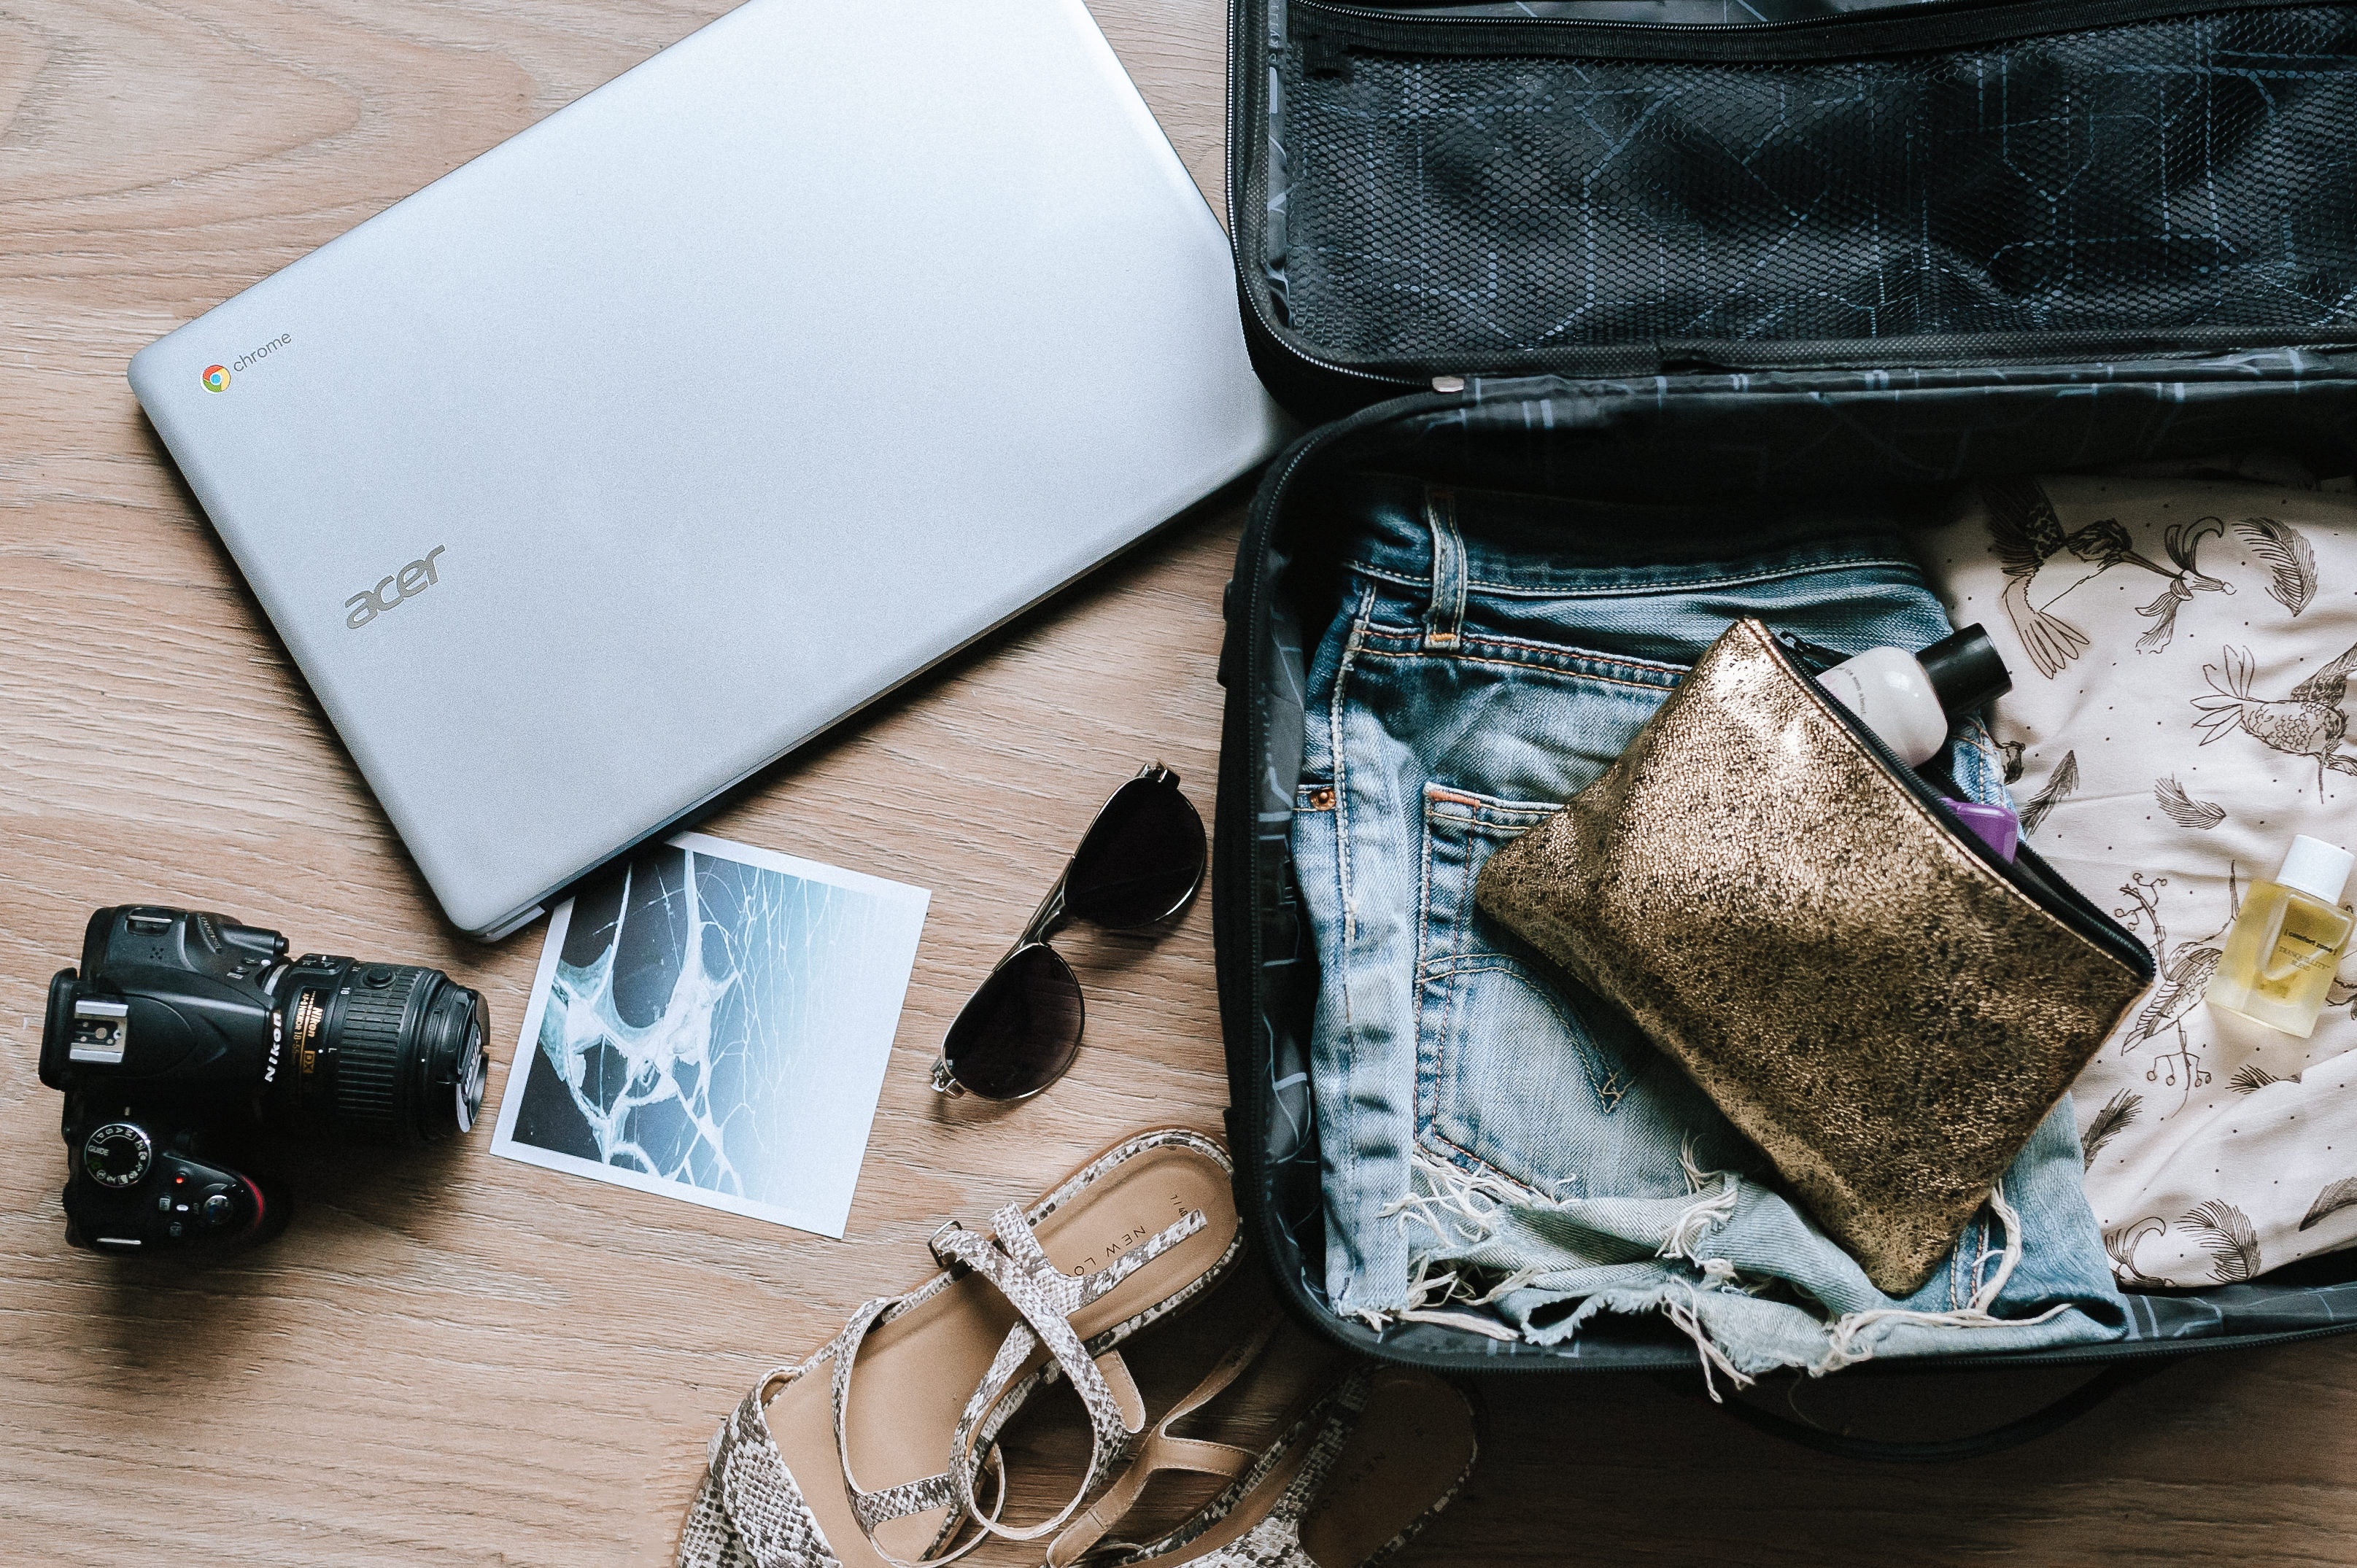 A laptop, camera, sunglasses and clothes sit around an open suitcase.